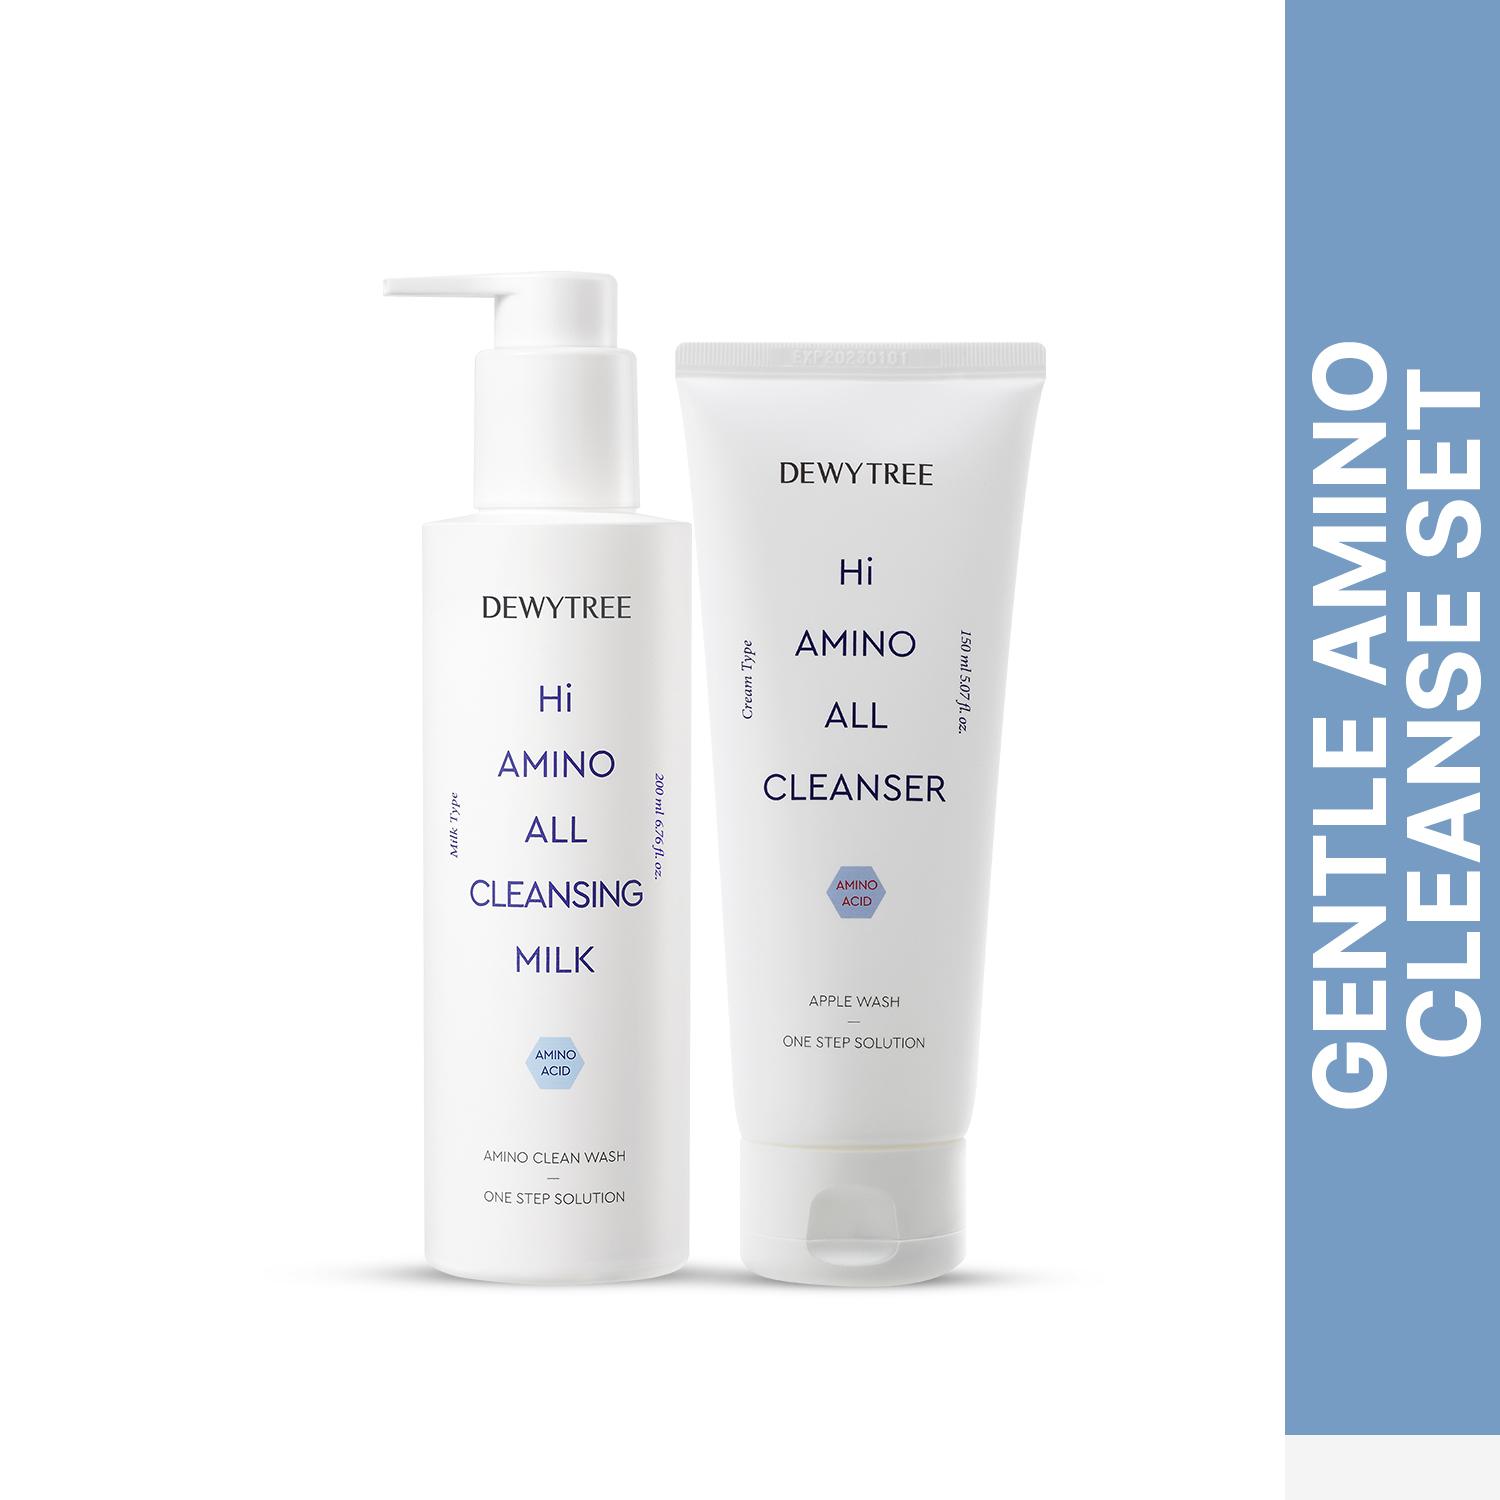 Dewytree | Dewytree Hi Amino All Cleansing Milk (200 ml) And Cleanser (150 ml) Combo